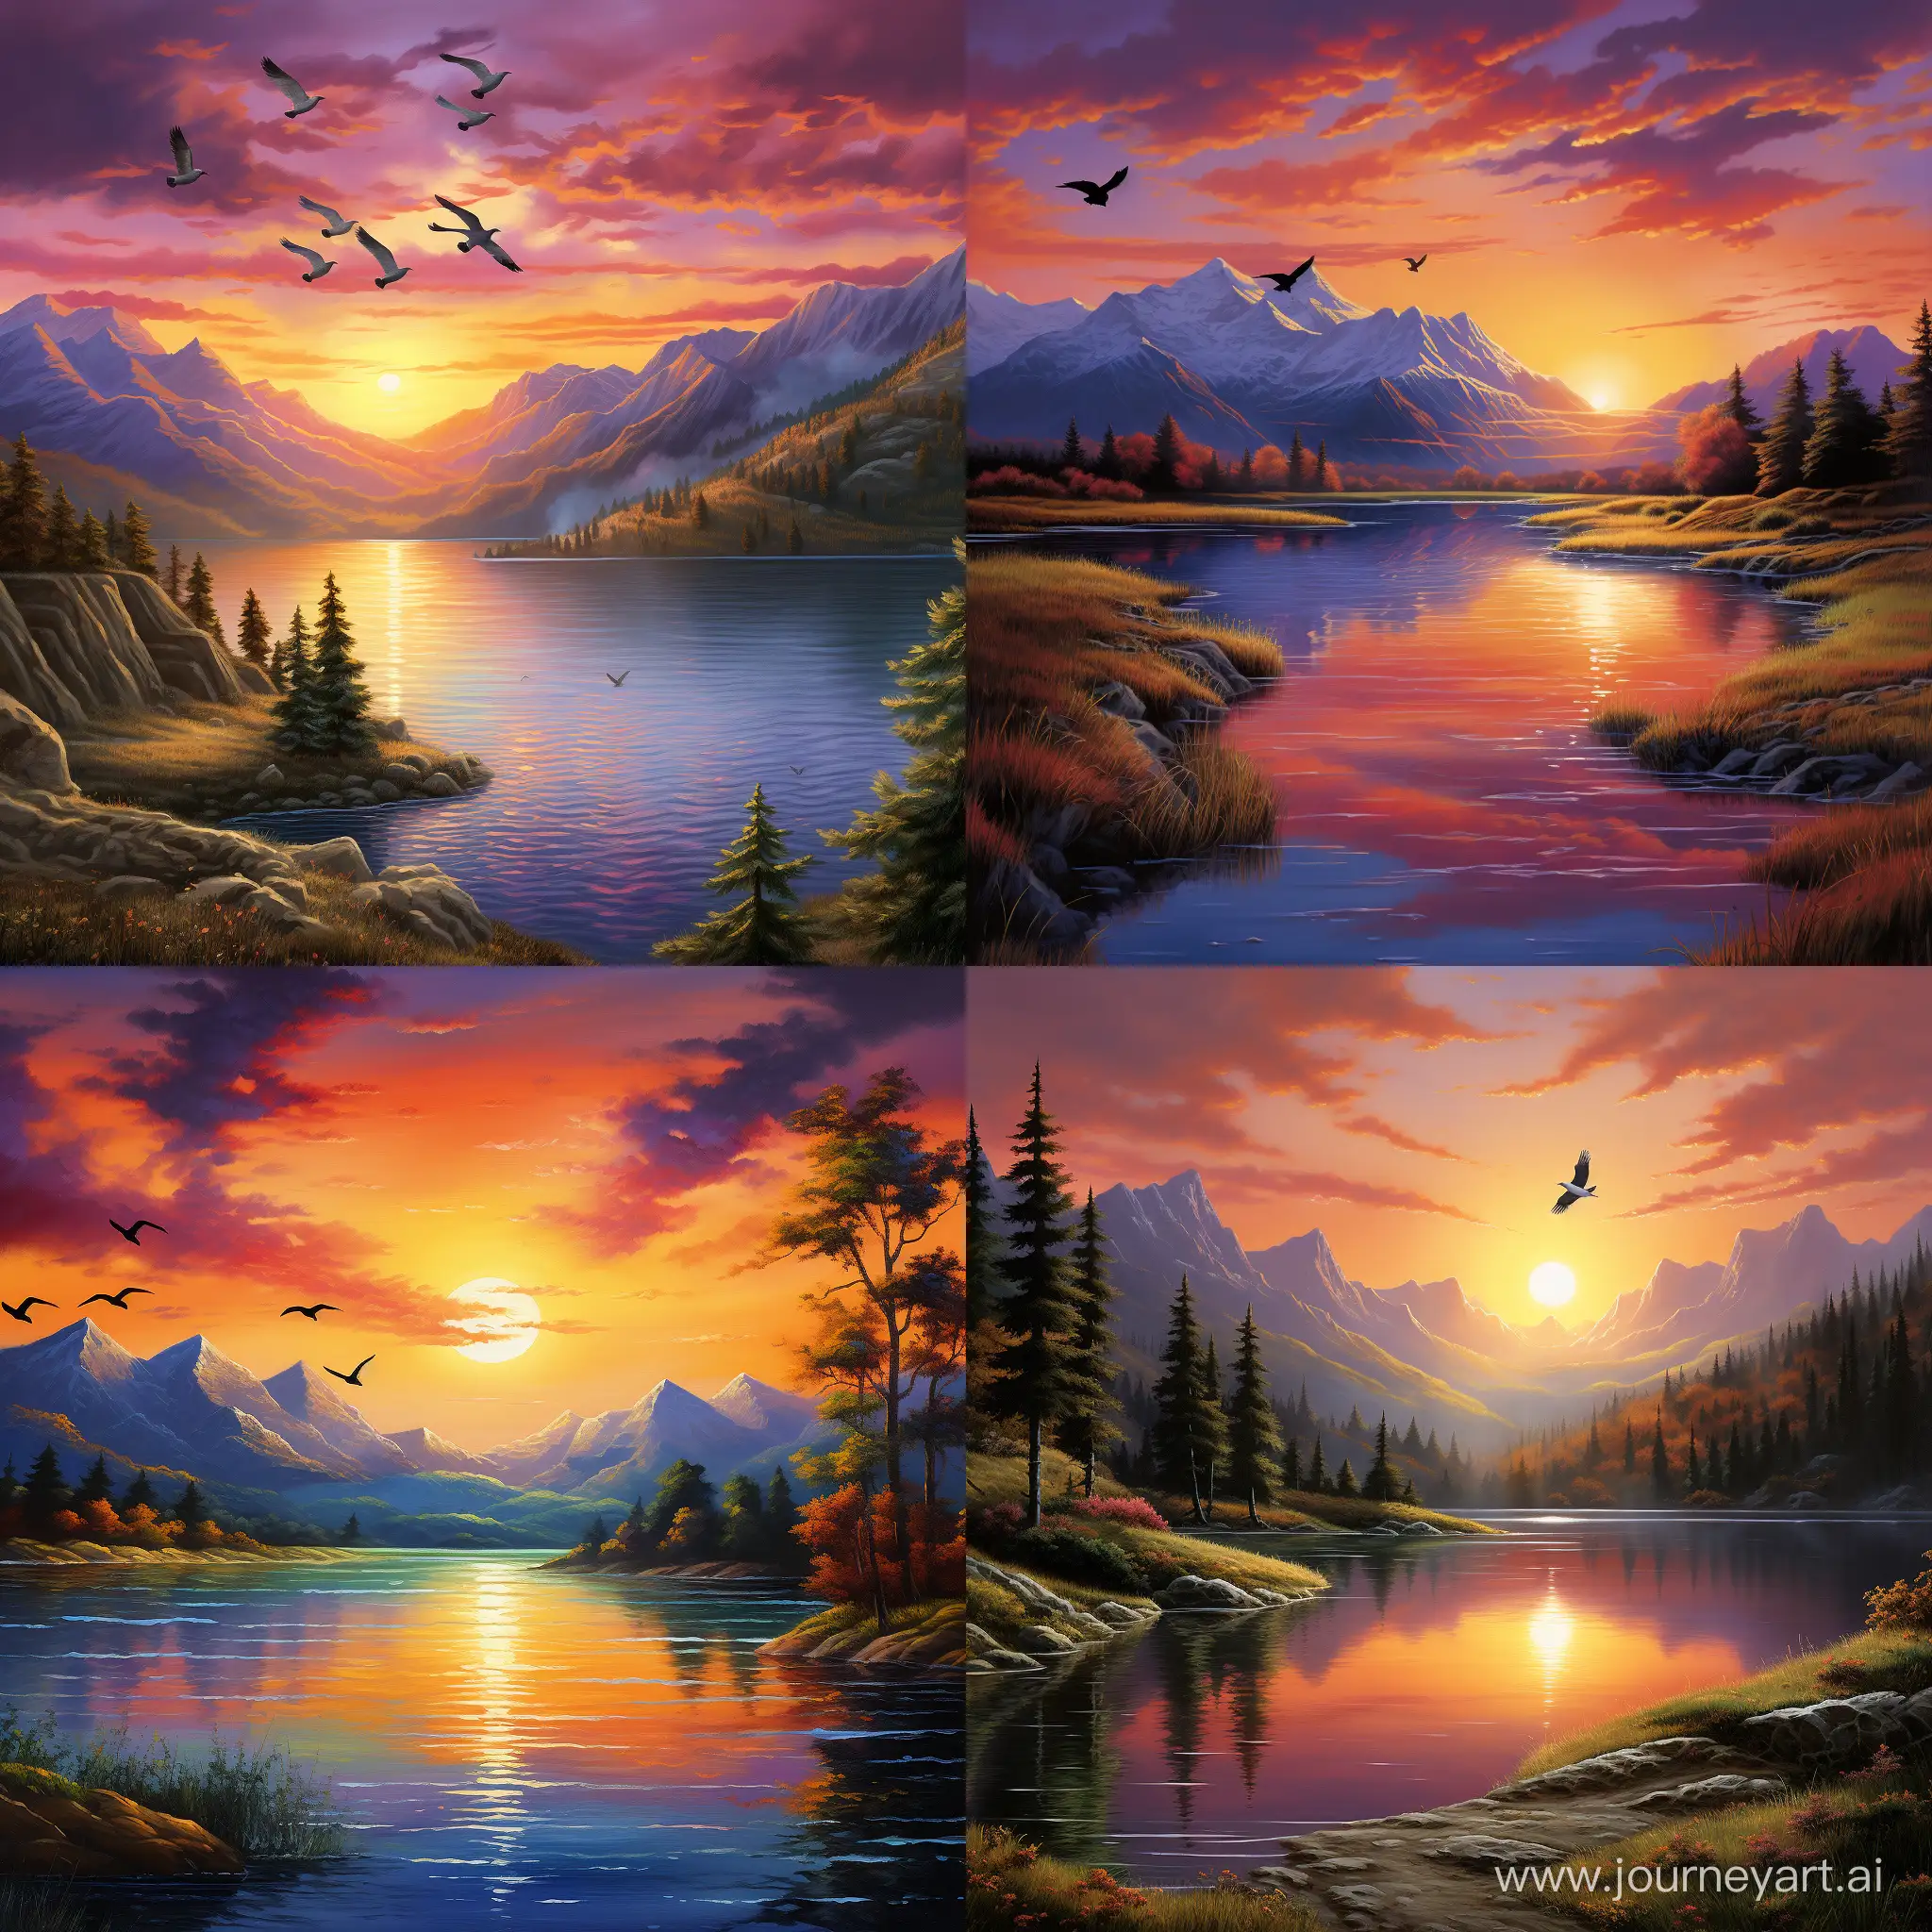 Vibrant-Sunset-Over-Mountainous-Landscape-with-Tranquil-Lake